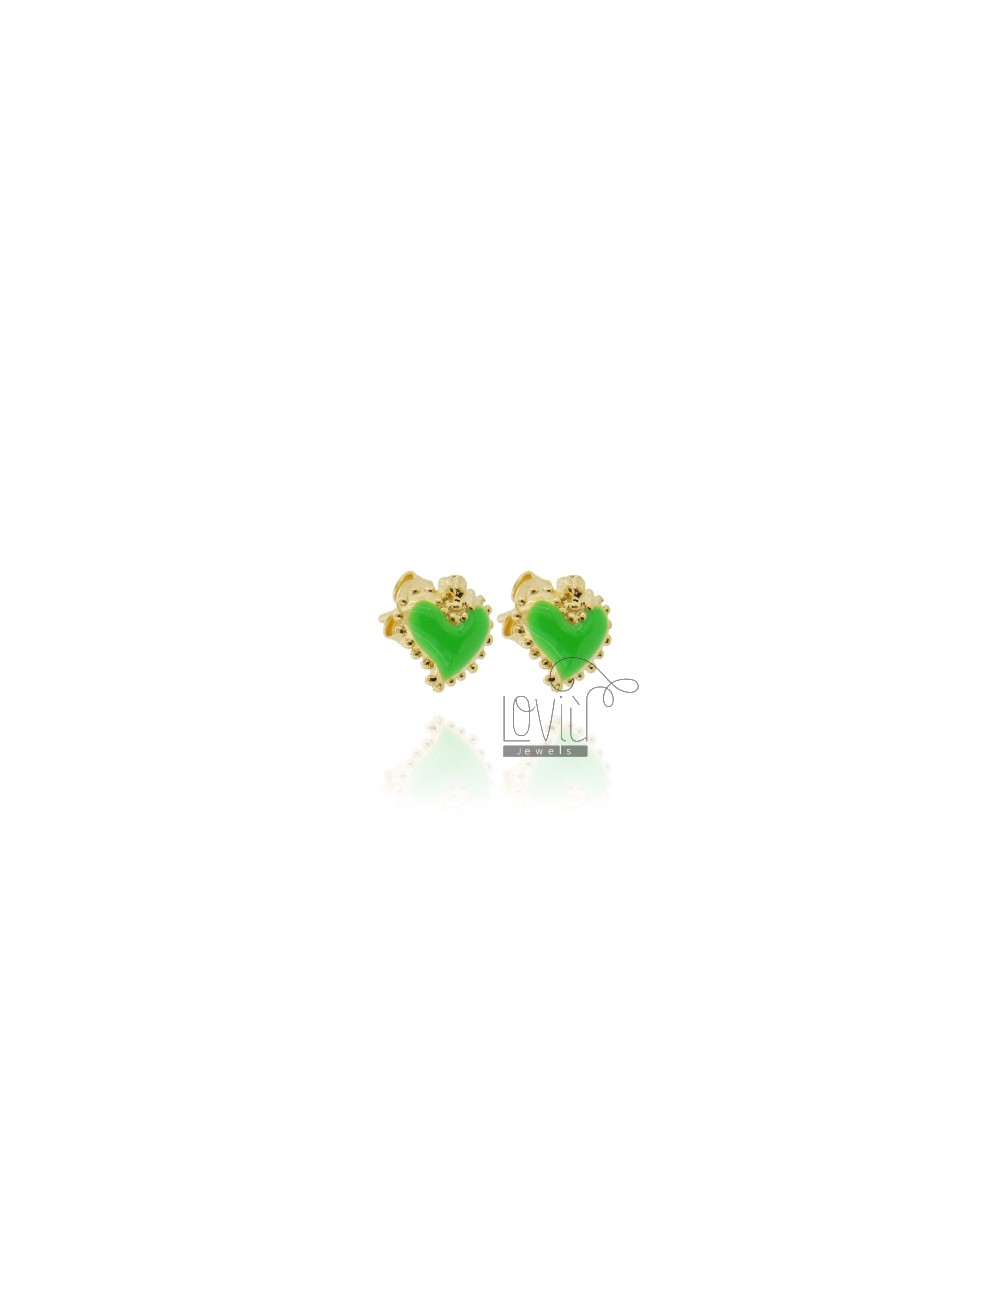 Lobo earrings sacred heart mm 13x10 in micro-cast silver gold plated tit  925 ‰ and green enamel